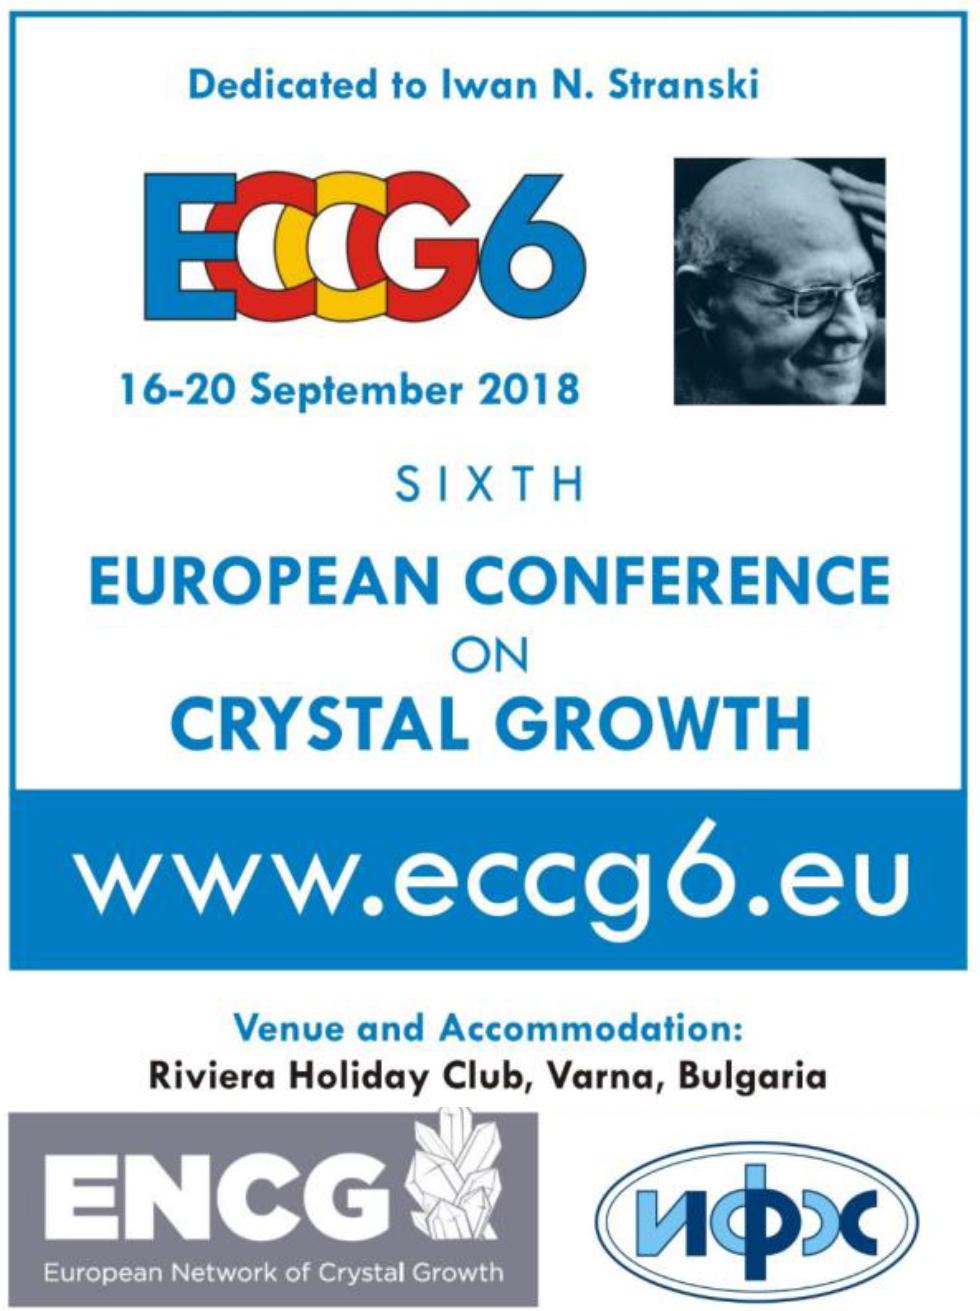 The 6 th European Conference on Crystal Growth and 2 nd European School on Crystal Growth